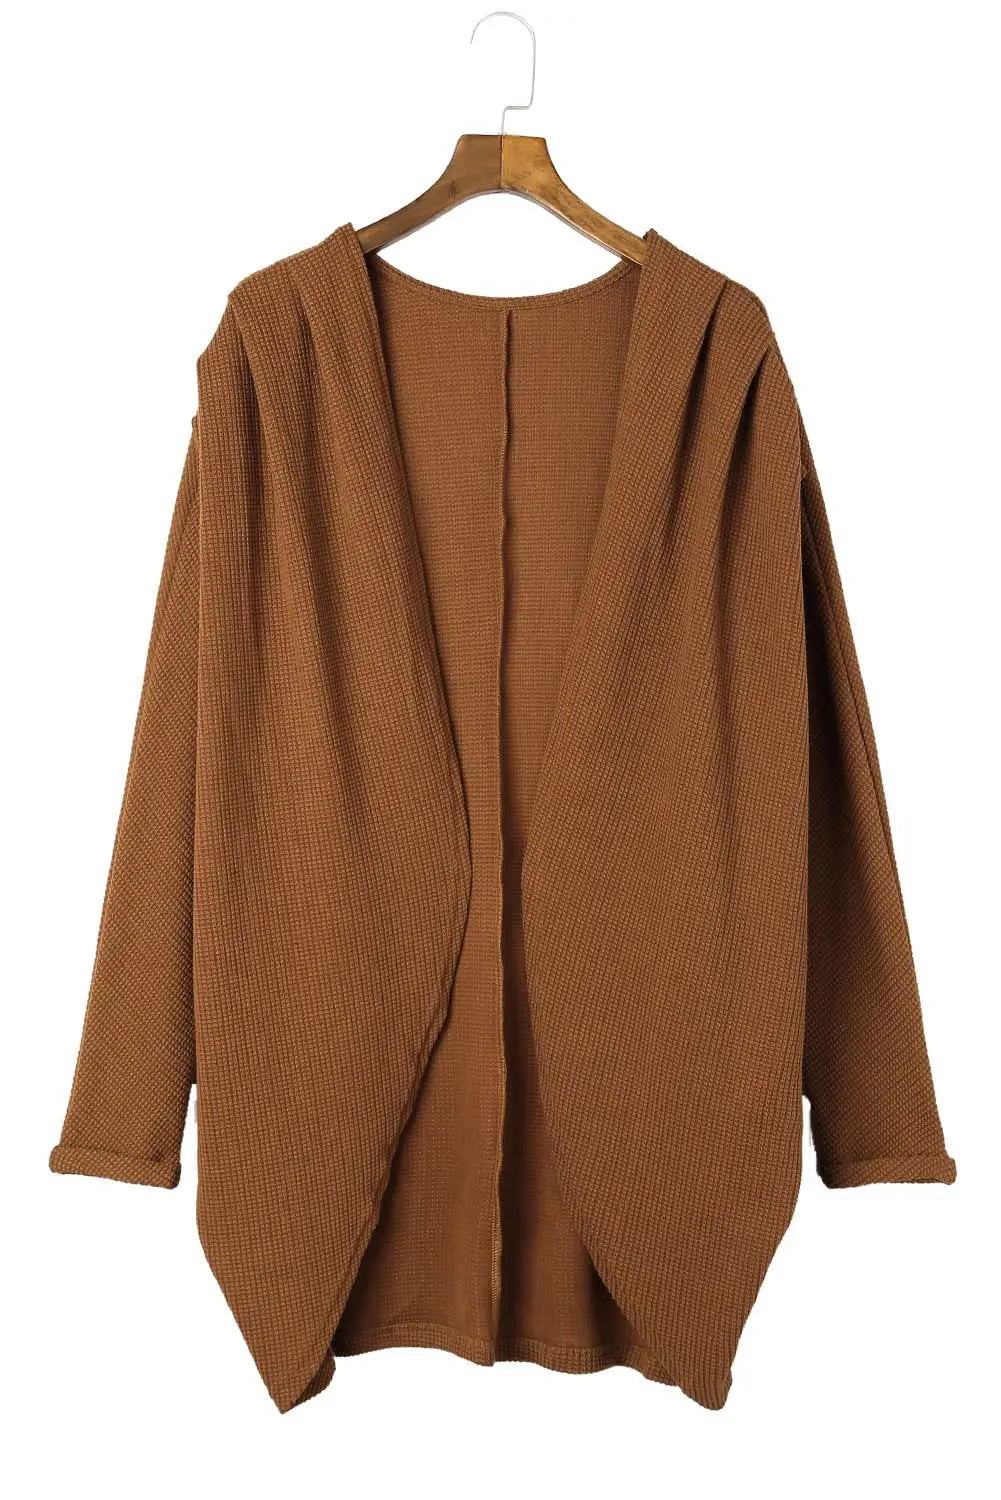 Brown waffle knit open front rounded hem cardigan - sweaters & cardigans